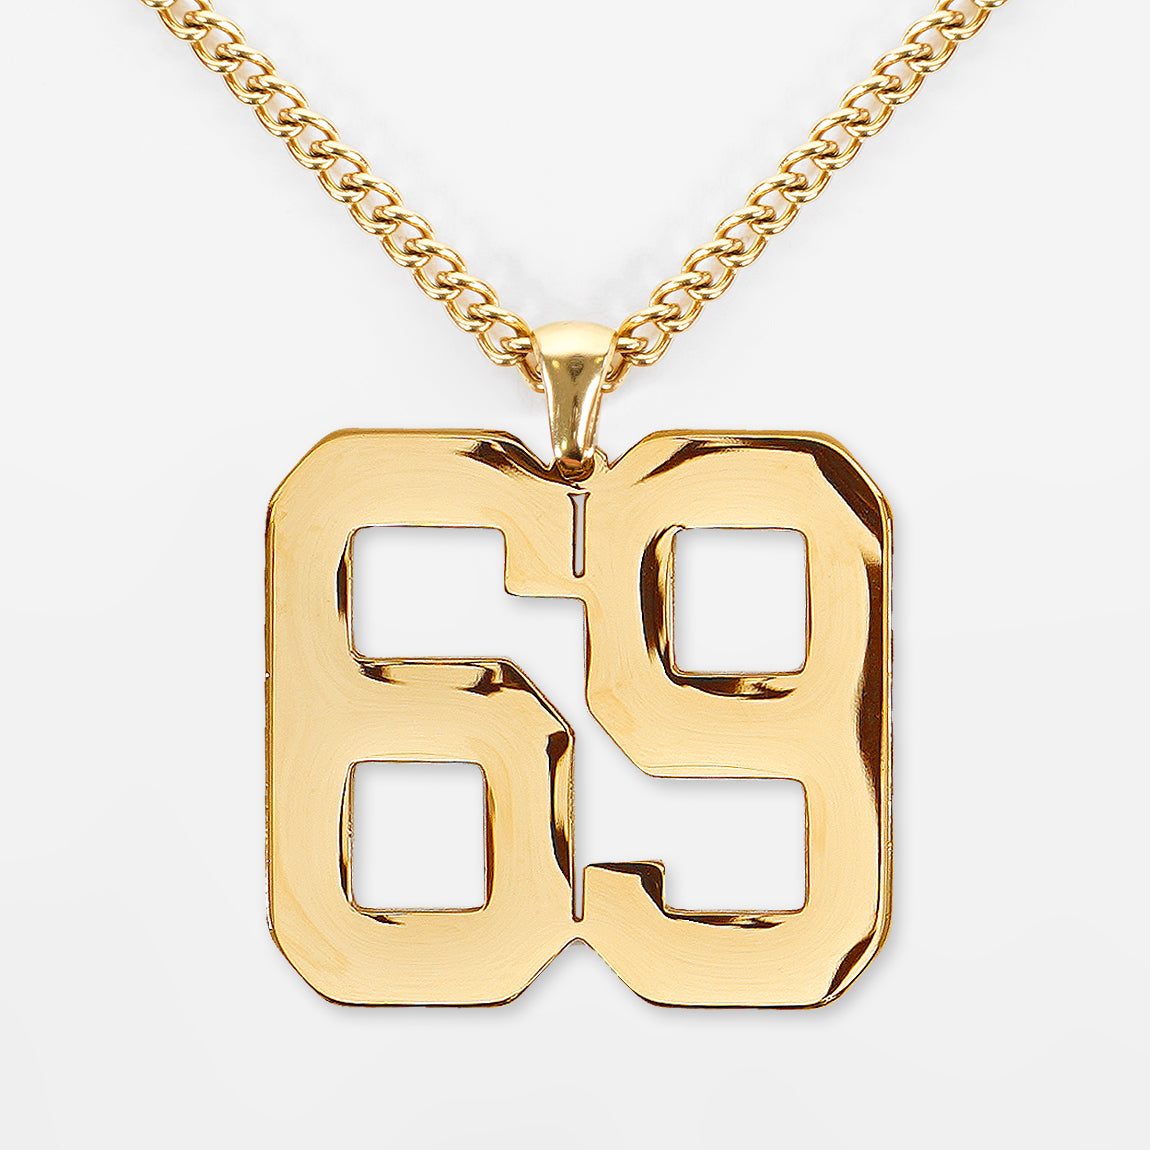 69 Number Pendant with Chain Necklace - Gold Plated Stainless Steel